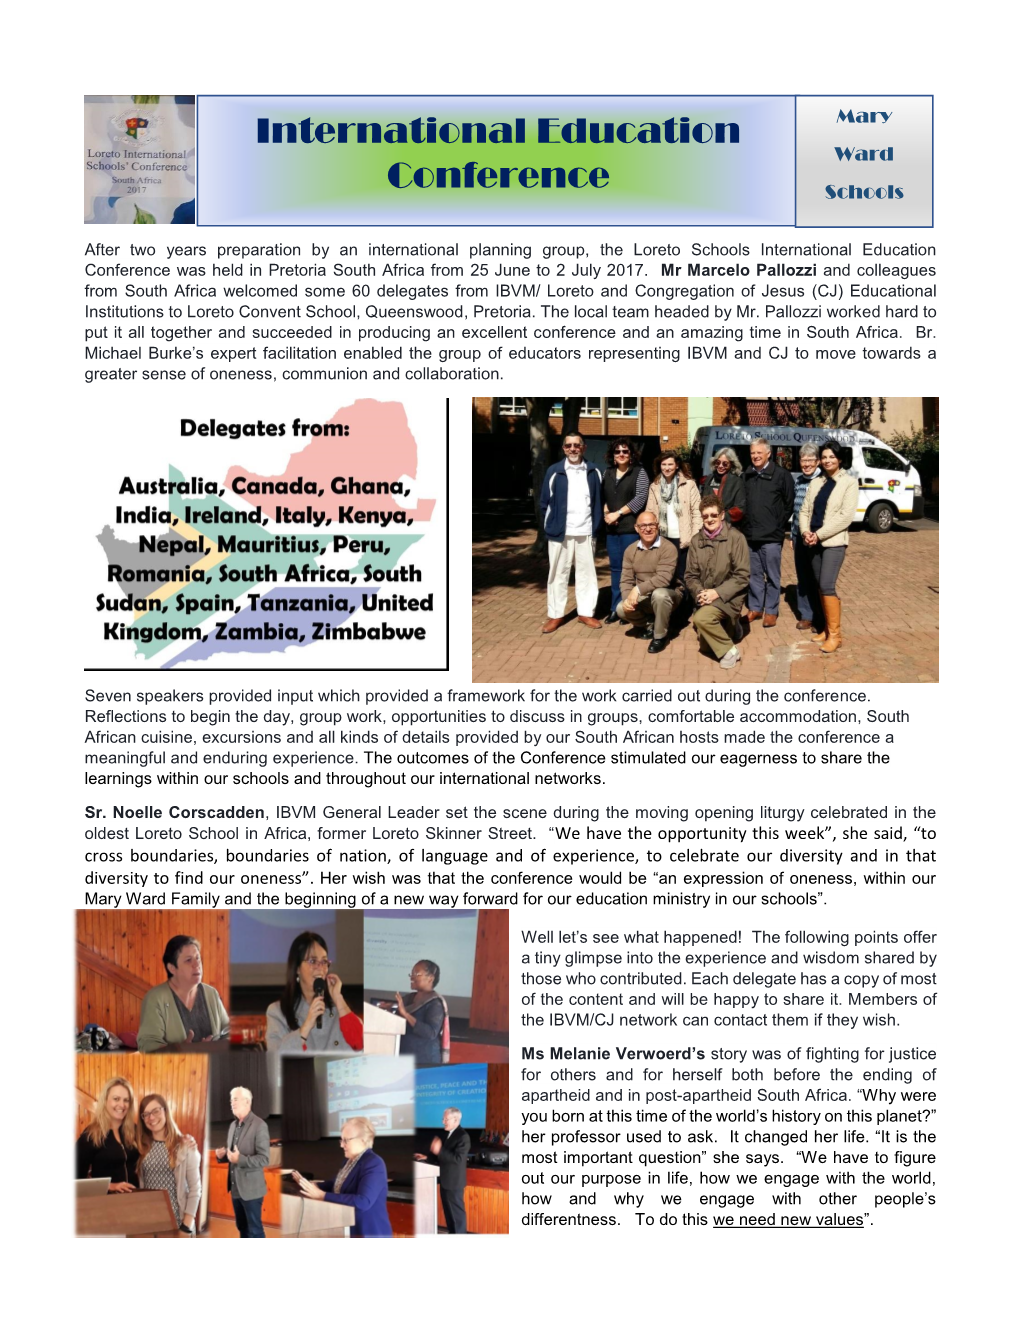 International Education Conference Was Held in Pretoria South Africa from 25 June to 2 July 2017